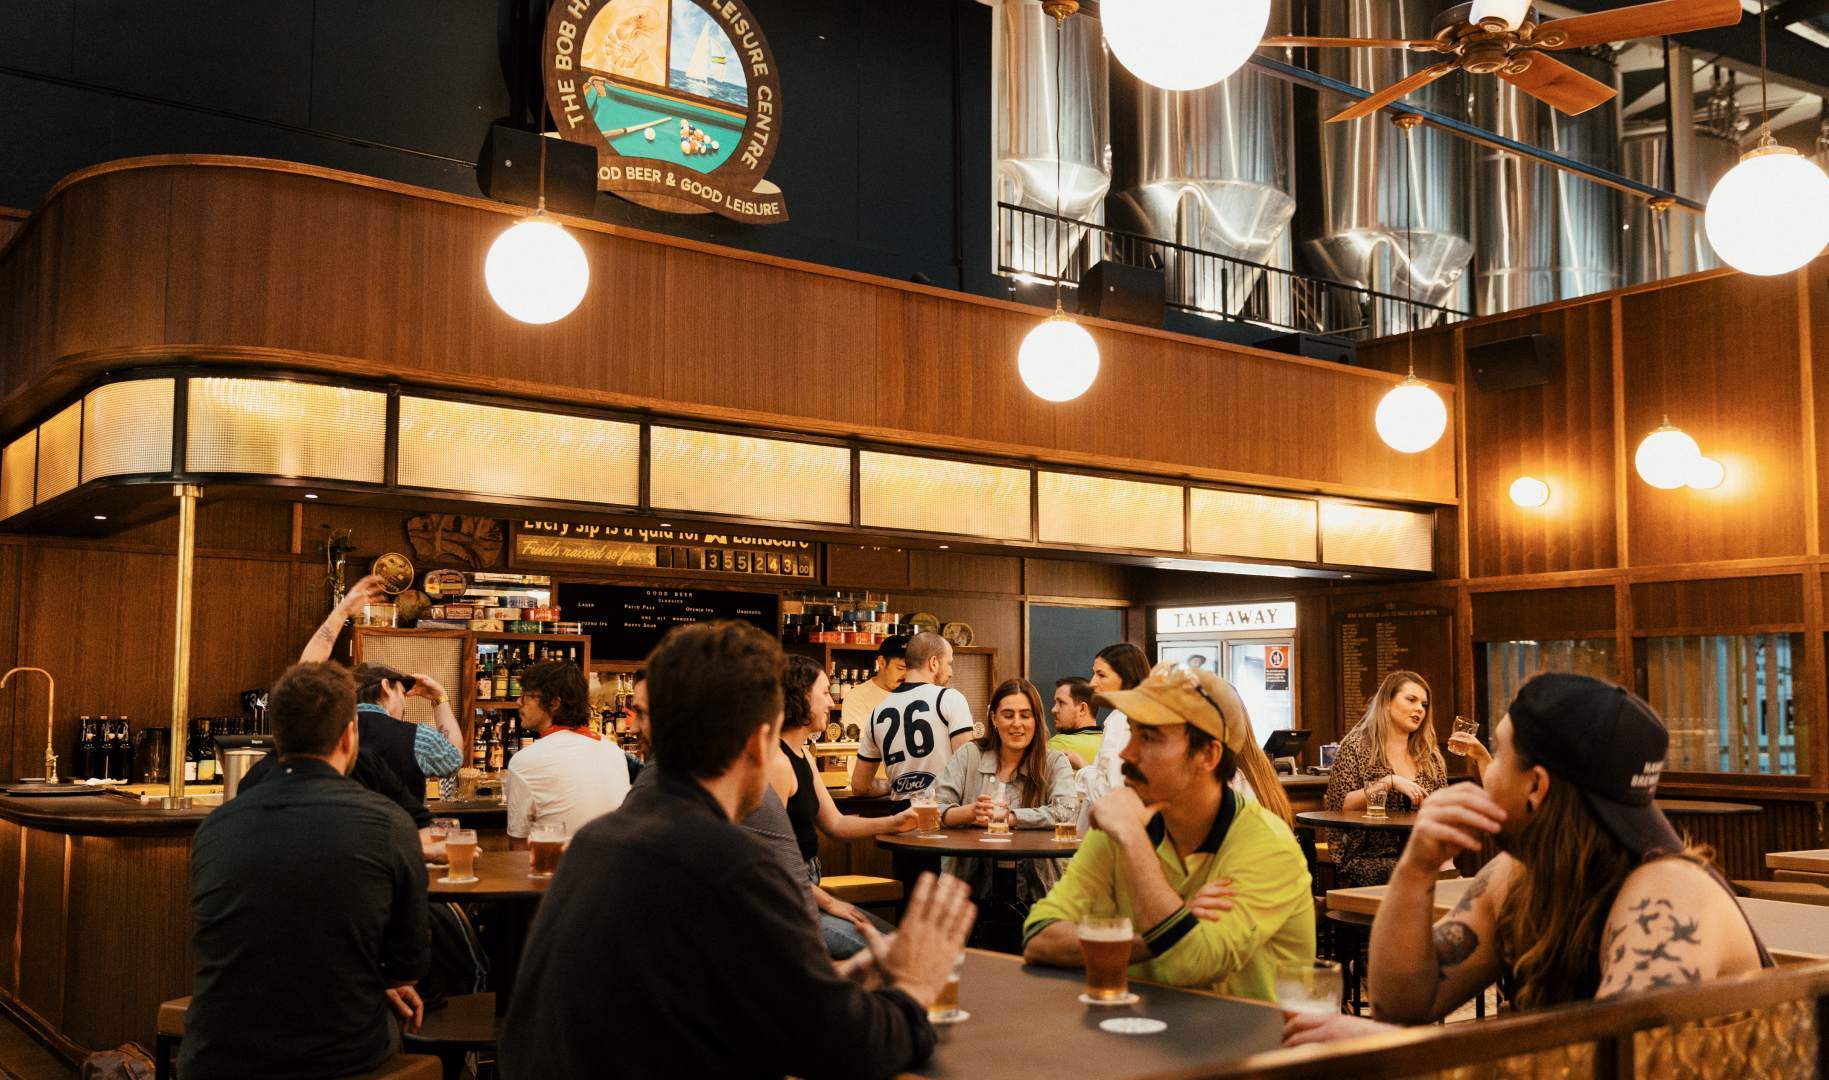 Hawke's Brewing Co Is Opening The Bob Hawke Beer and Leisure Centre in Marrickville This Week